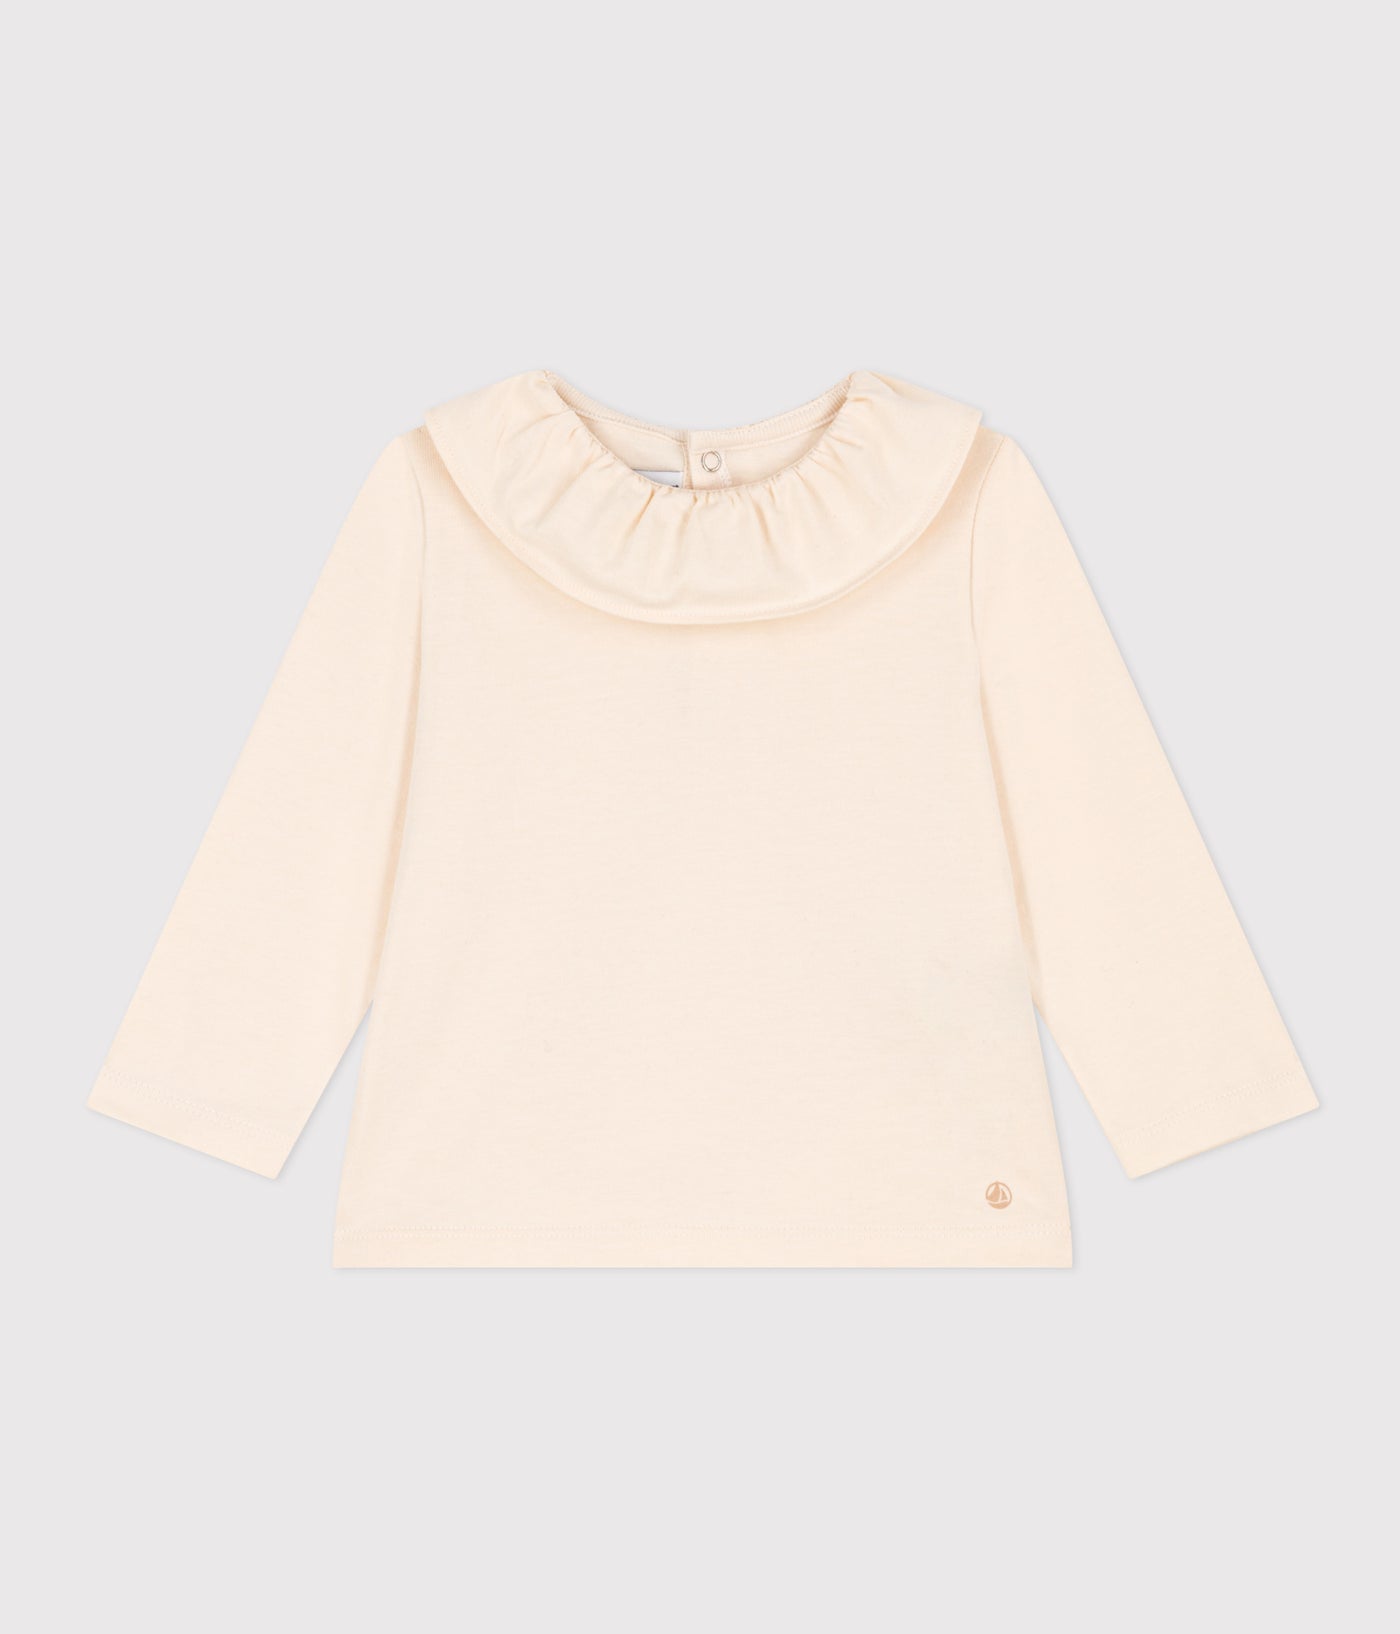 BABIES' LONG-SLEEVED JERSEY BLOUSE